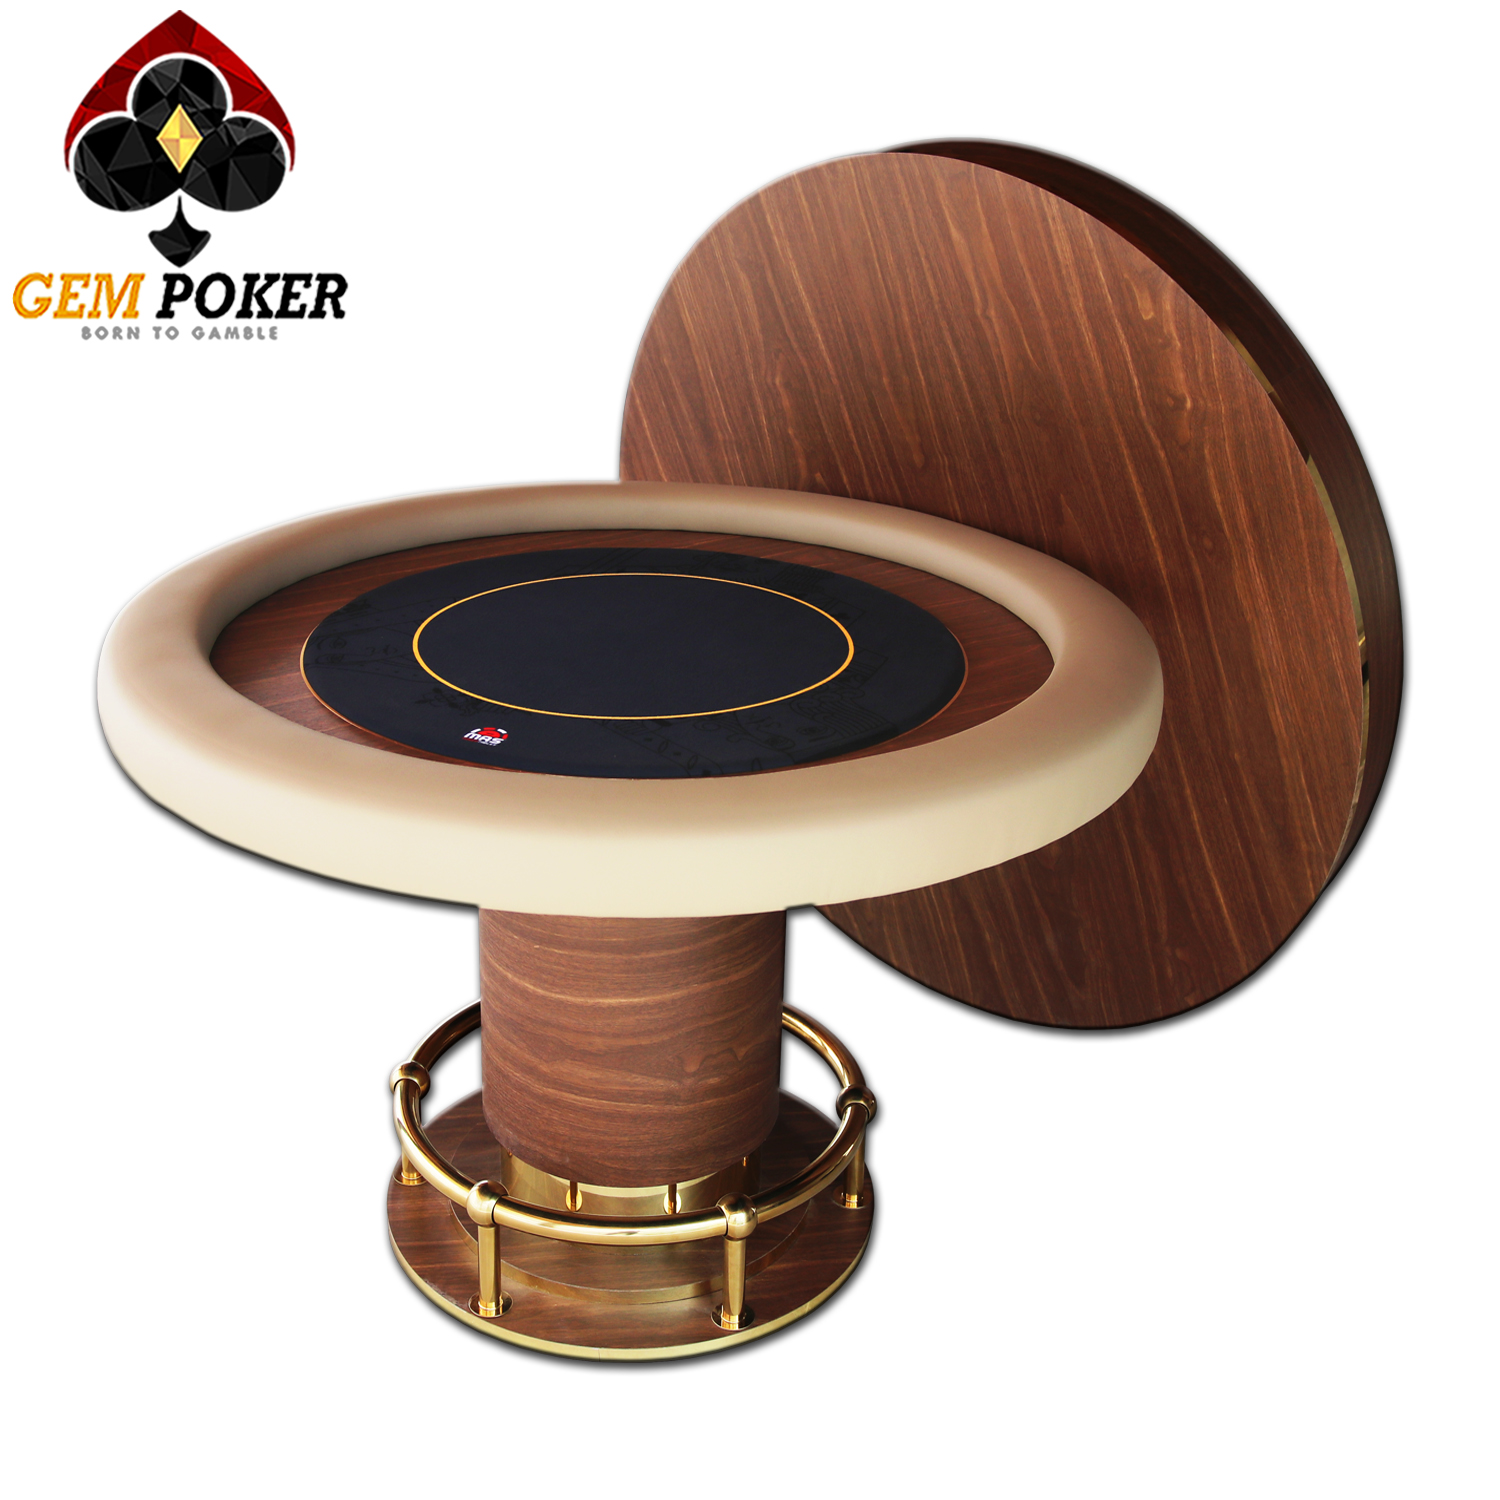 ROUND POKER TABLE WITH LIP